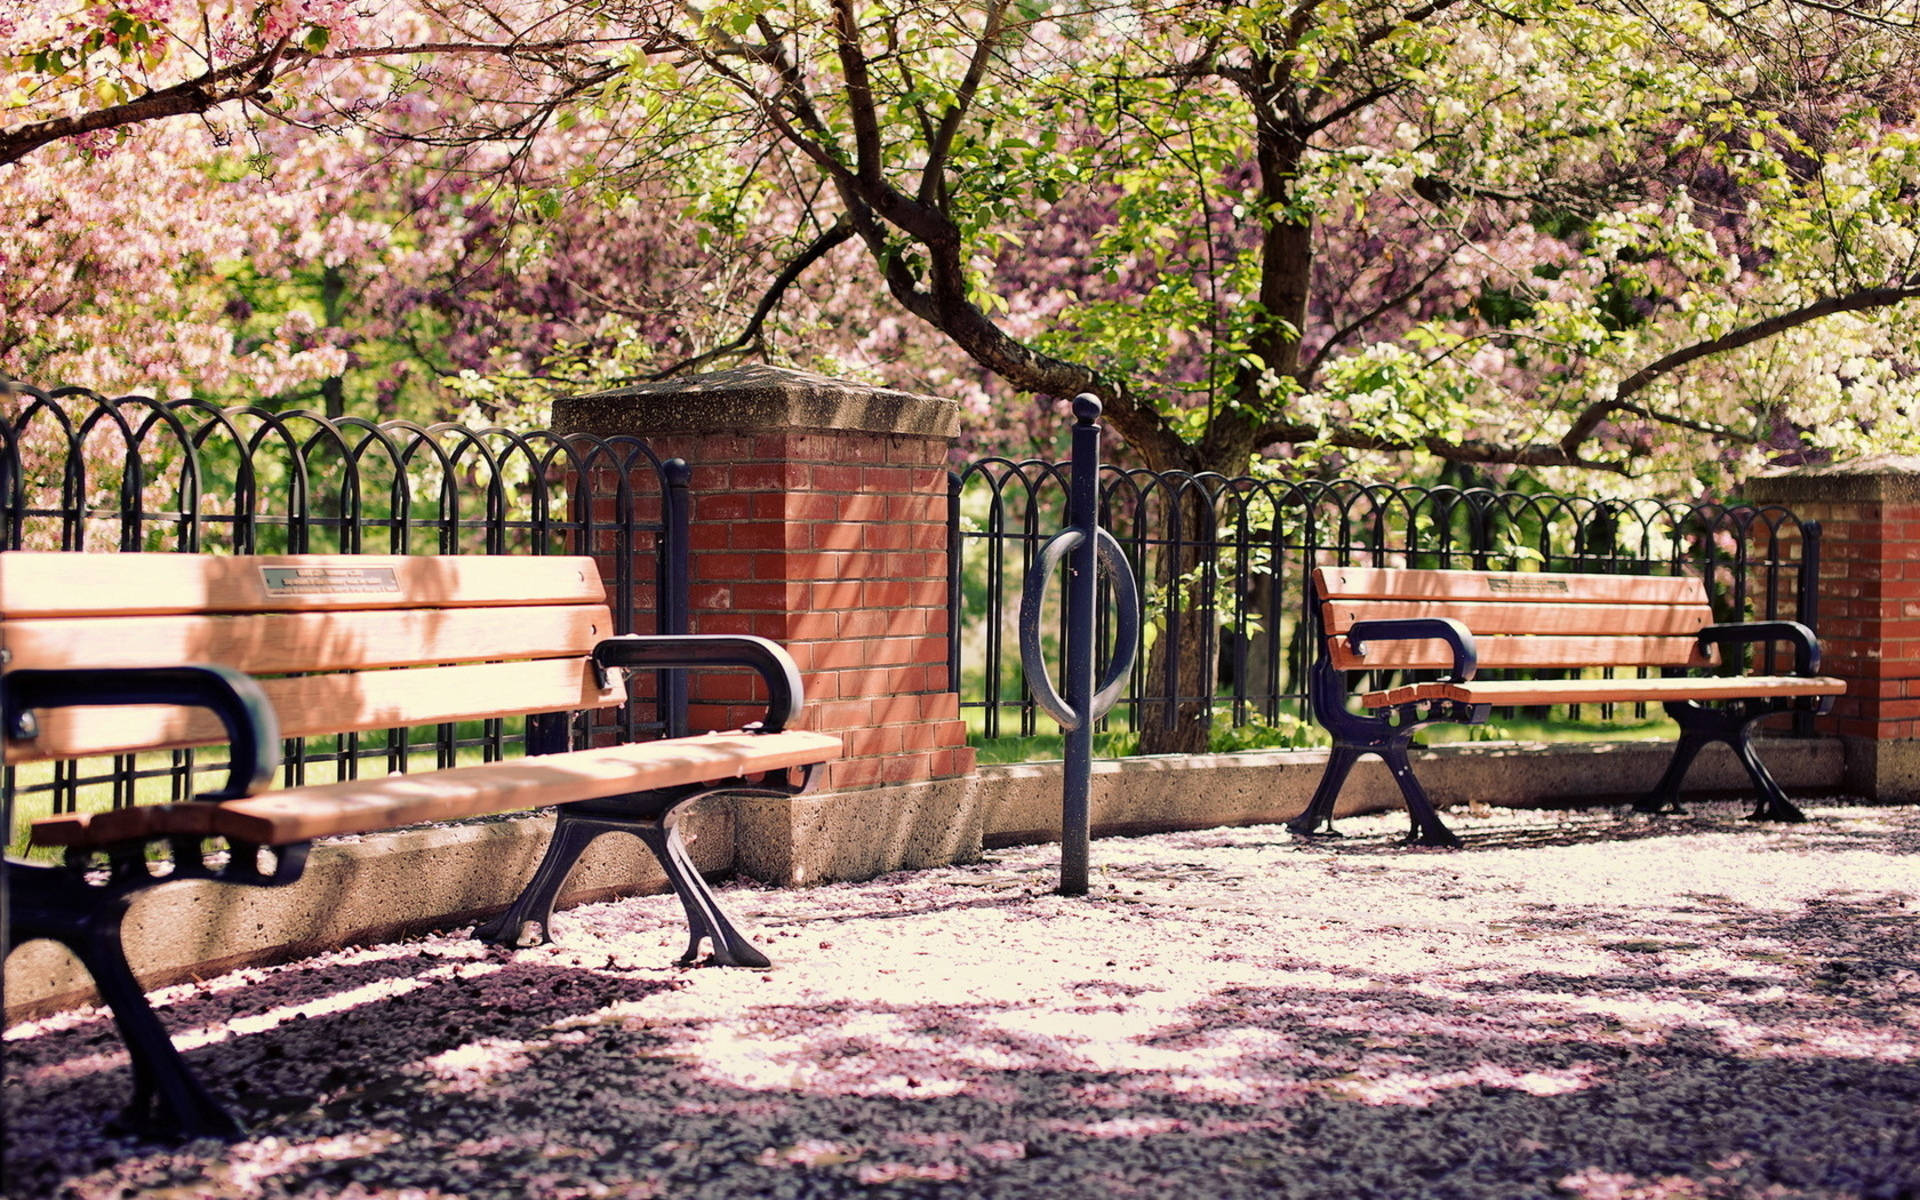 Wooden Park Benches